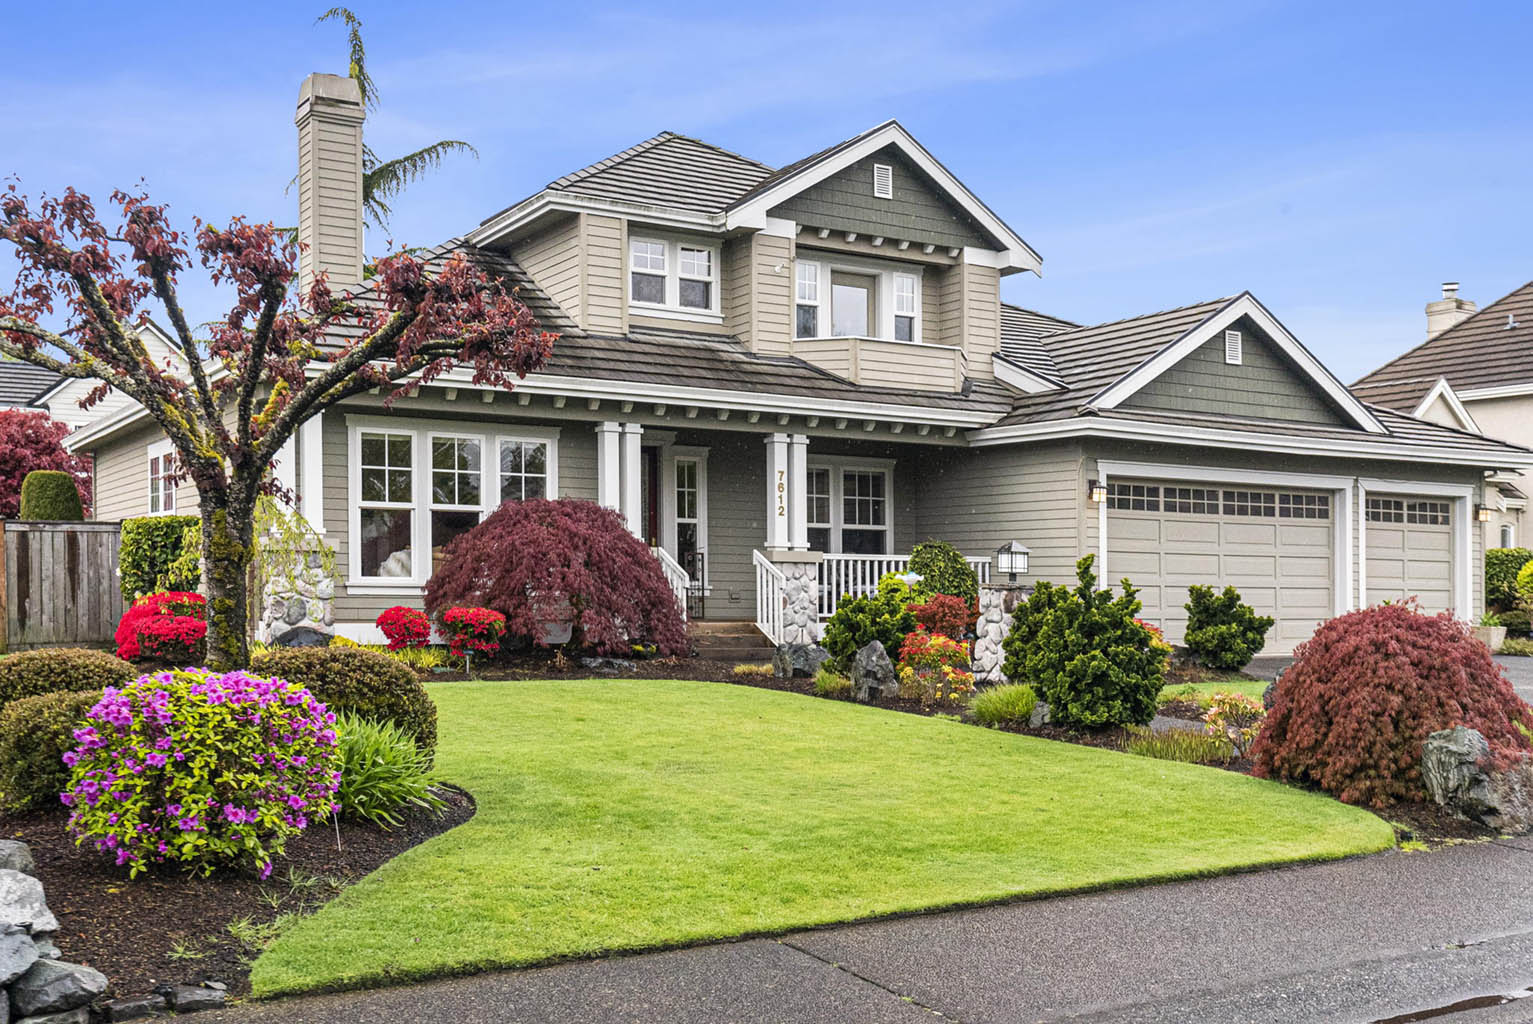 Mature landscaping and attached three car garage